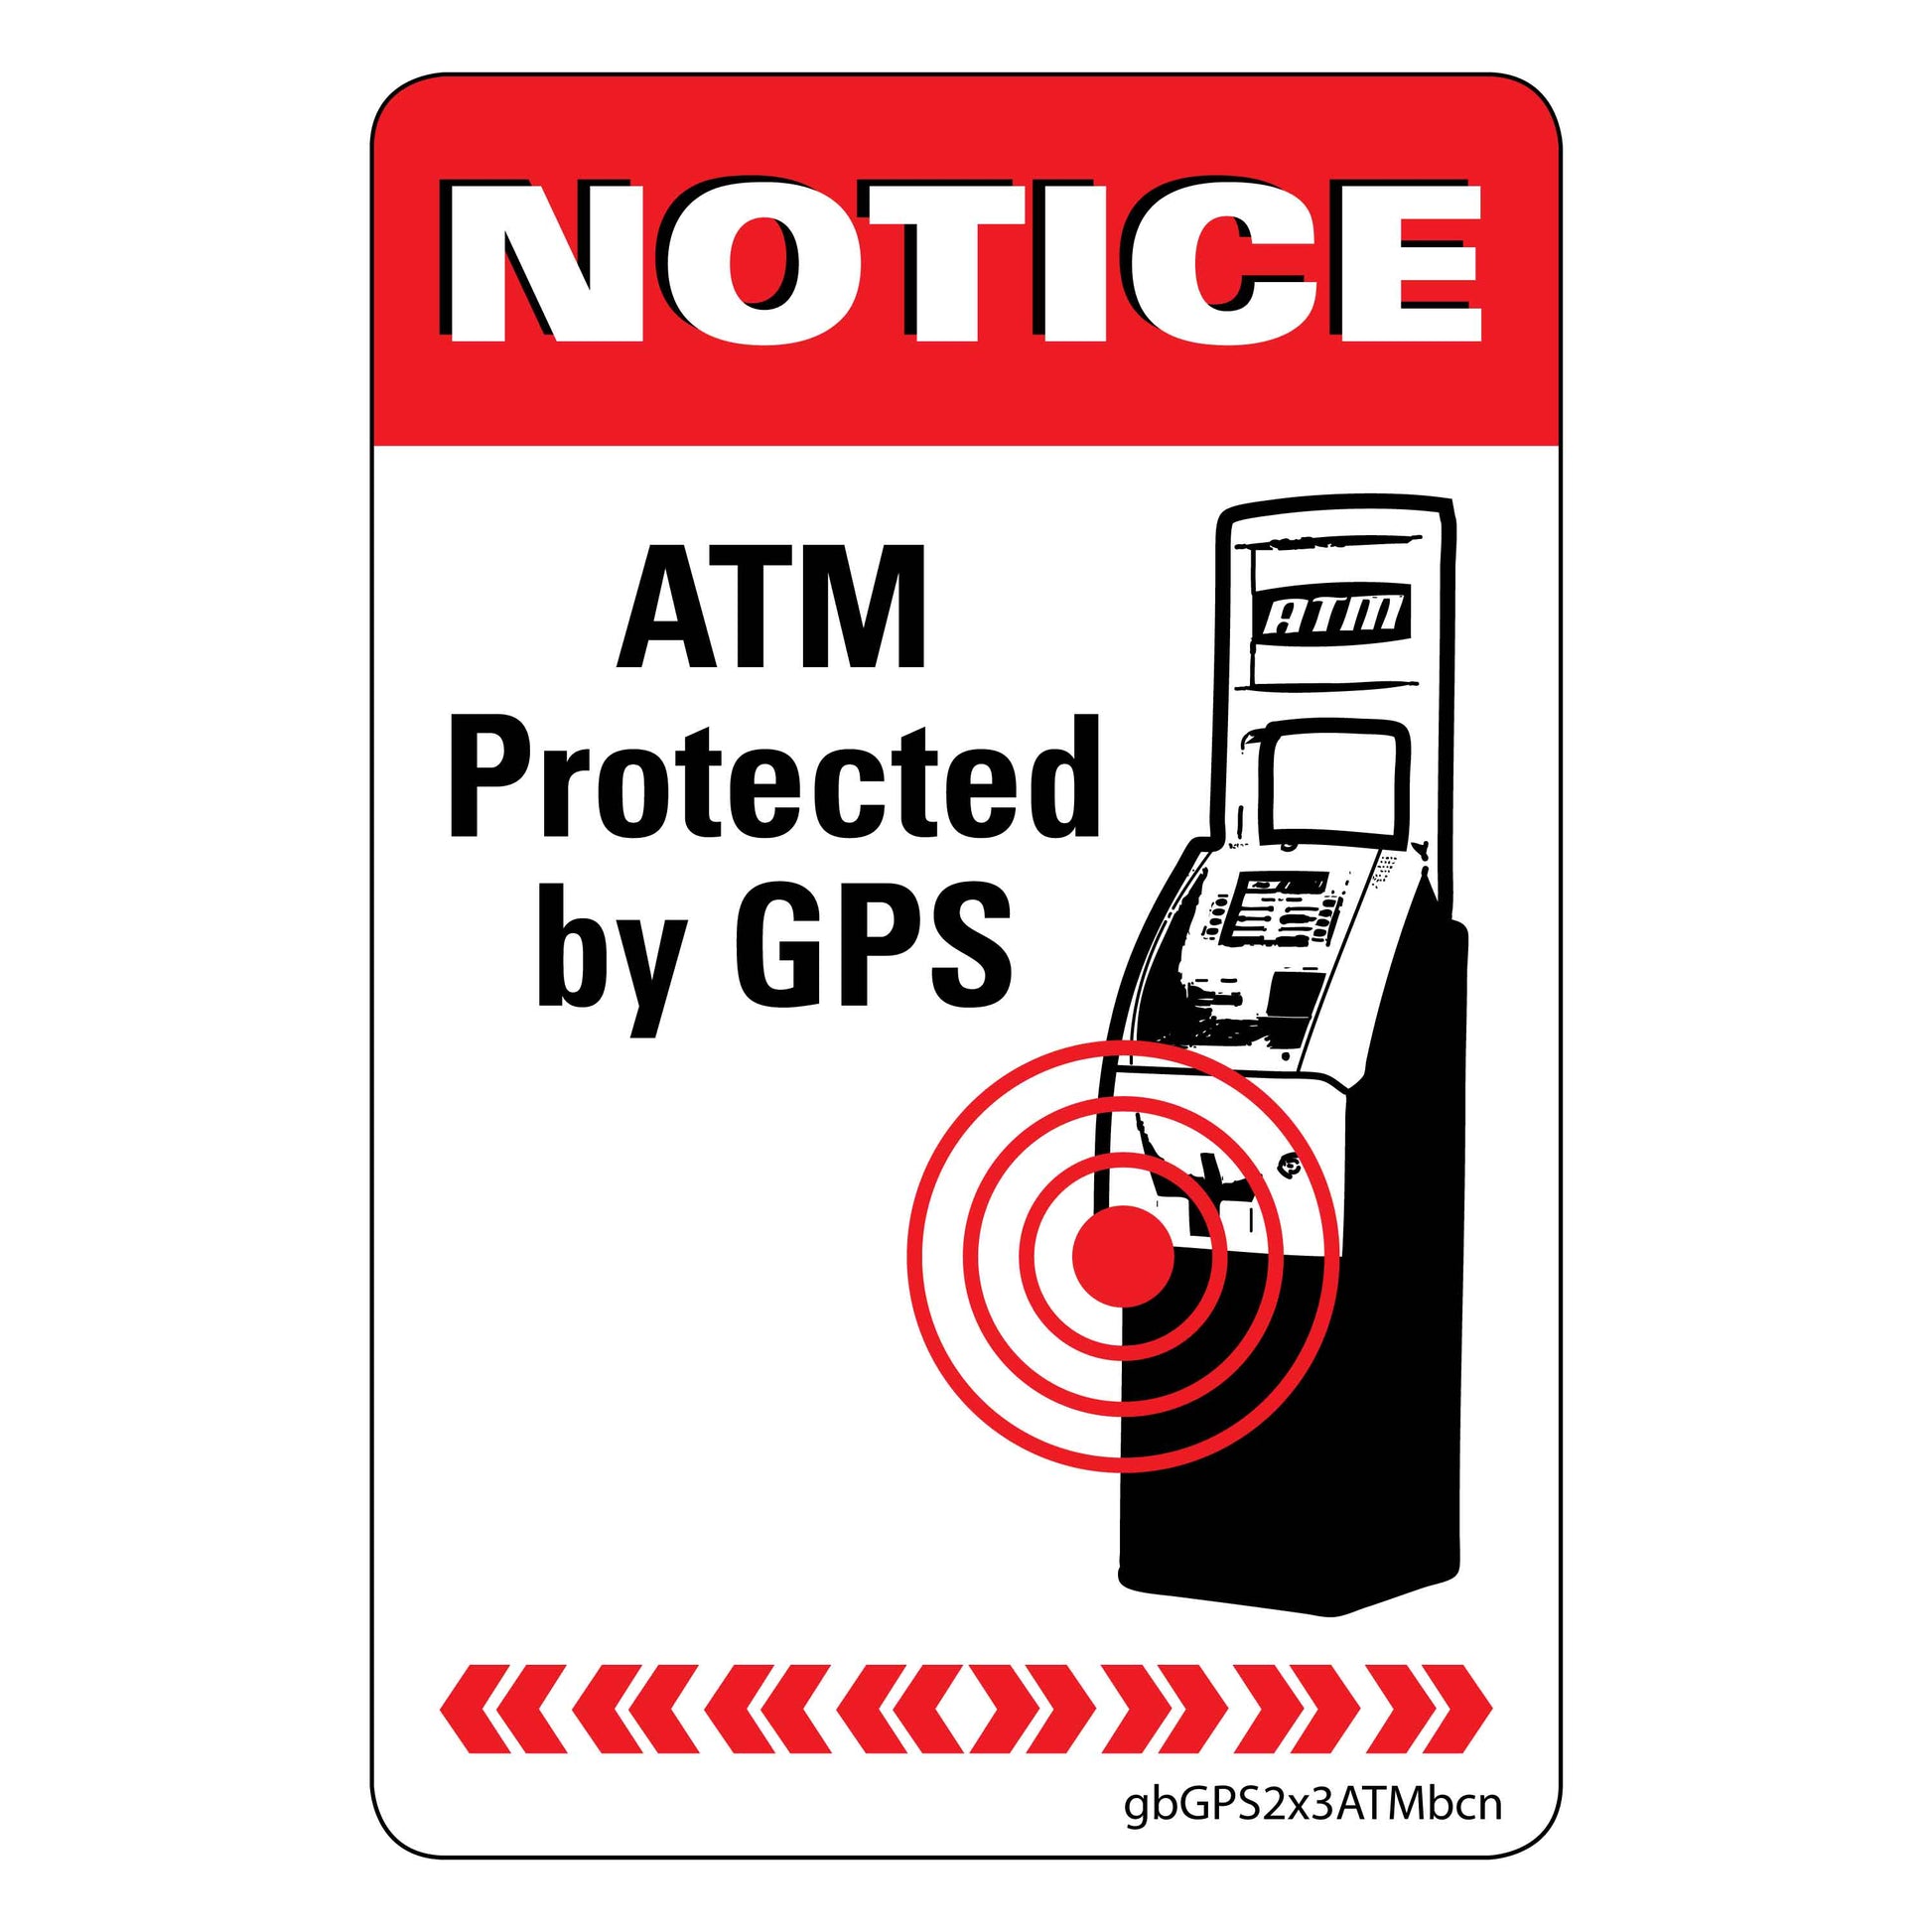 Notice, ATM Protected by GPS Decal. 2 inches by 3 inches in size.